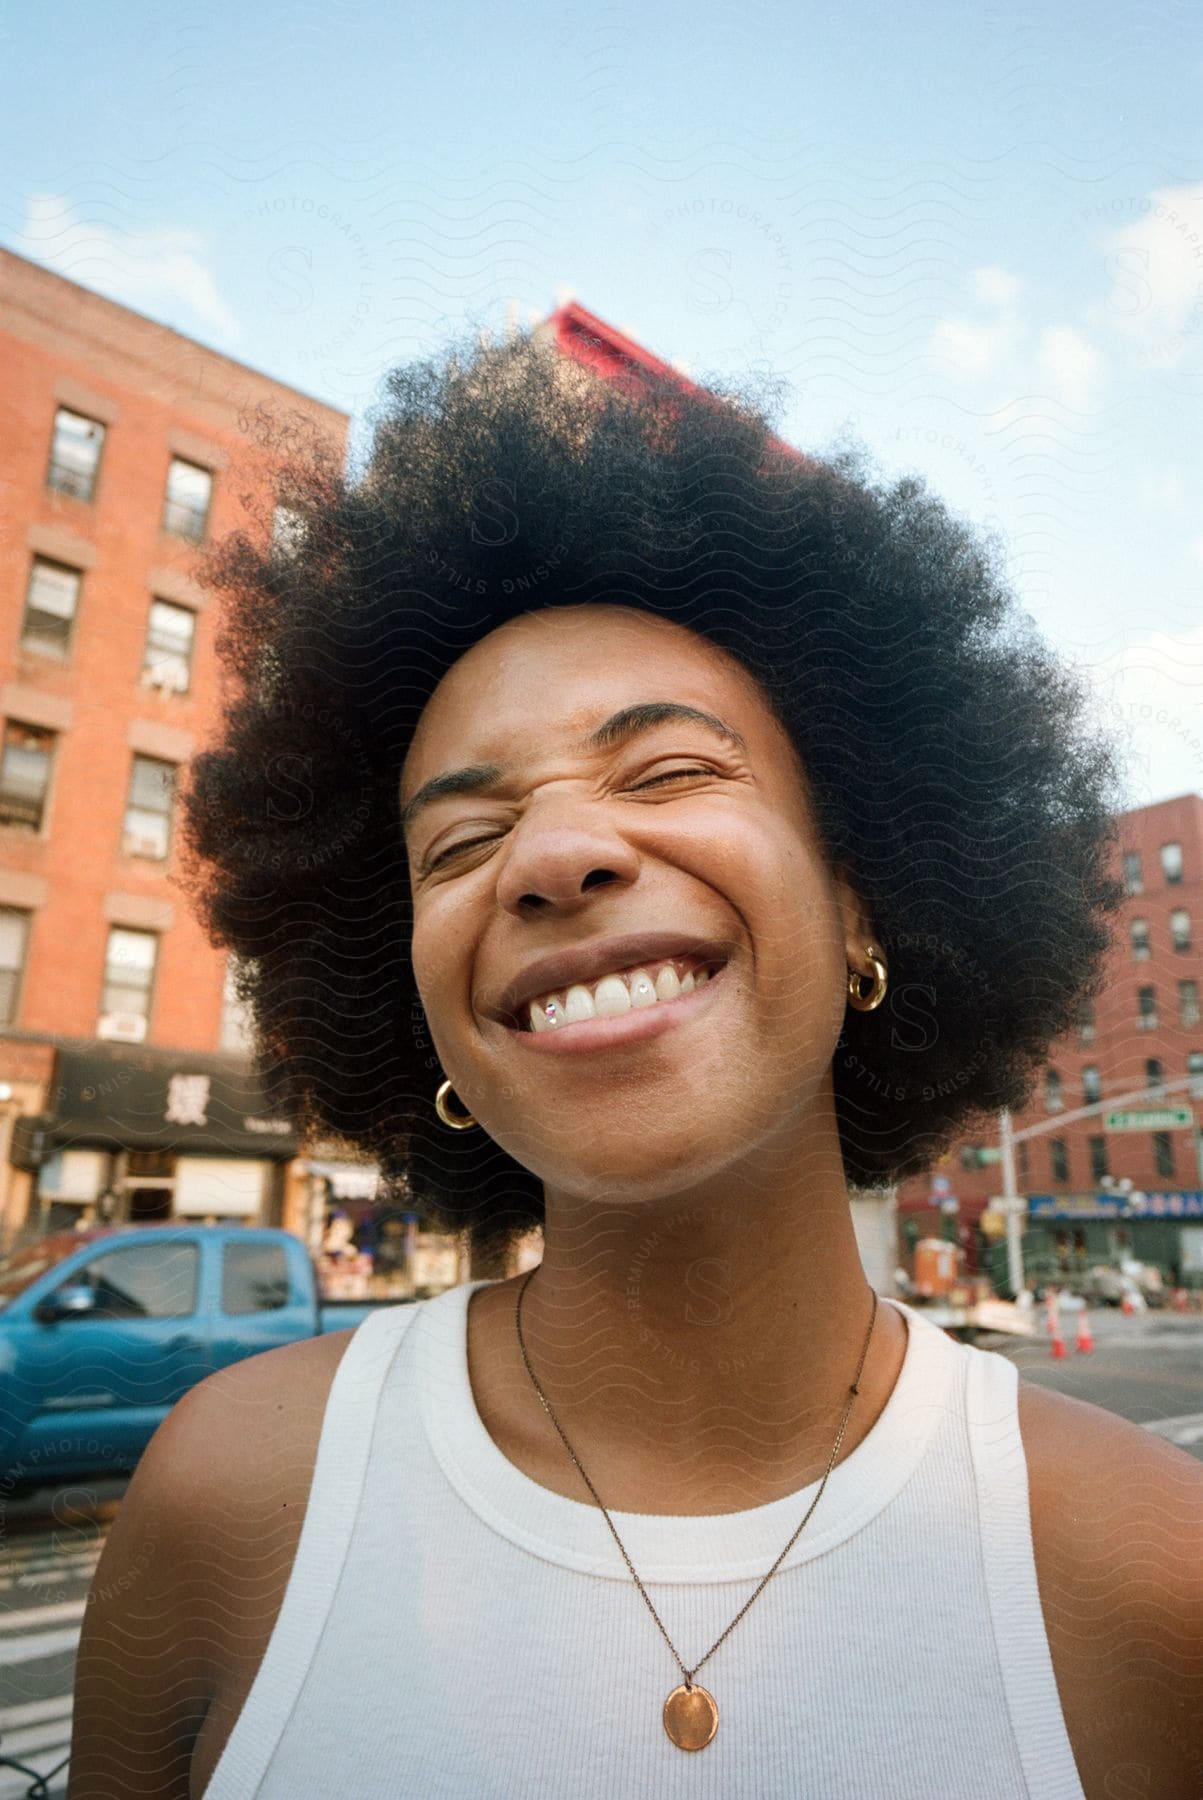 Woman with curly hair earrings and white sleeveless shirt smiling broadly on the street in downtown nyc